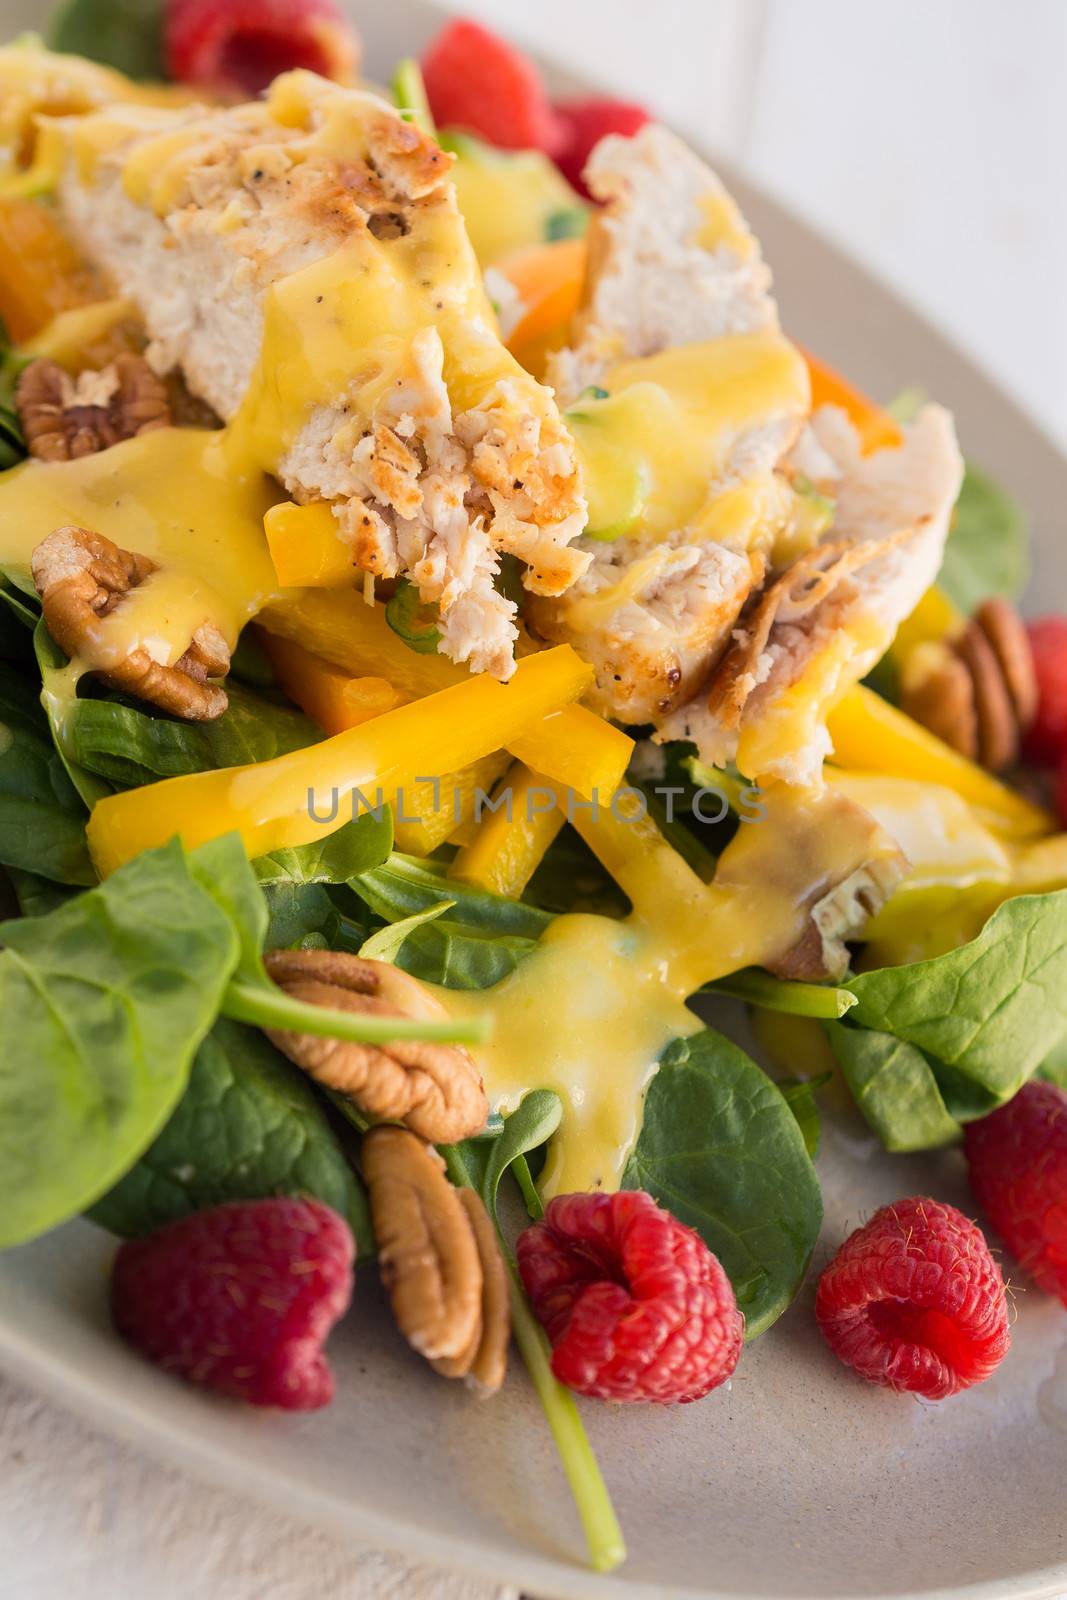 Californian Chicken Salad by Talanis